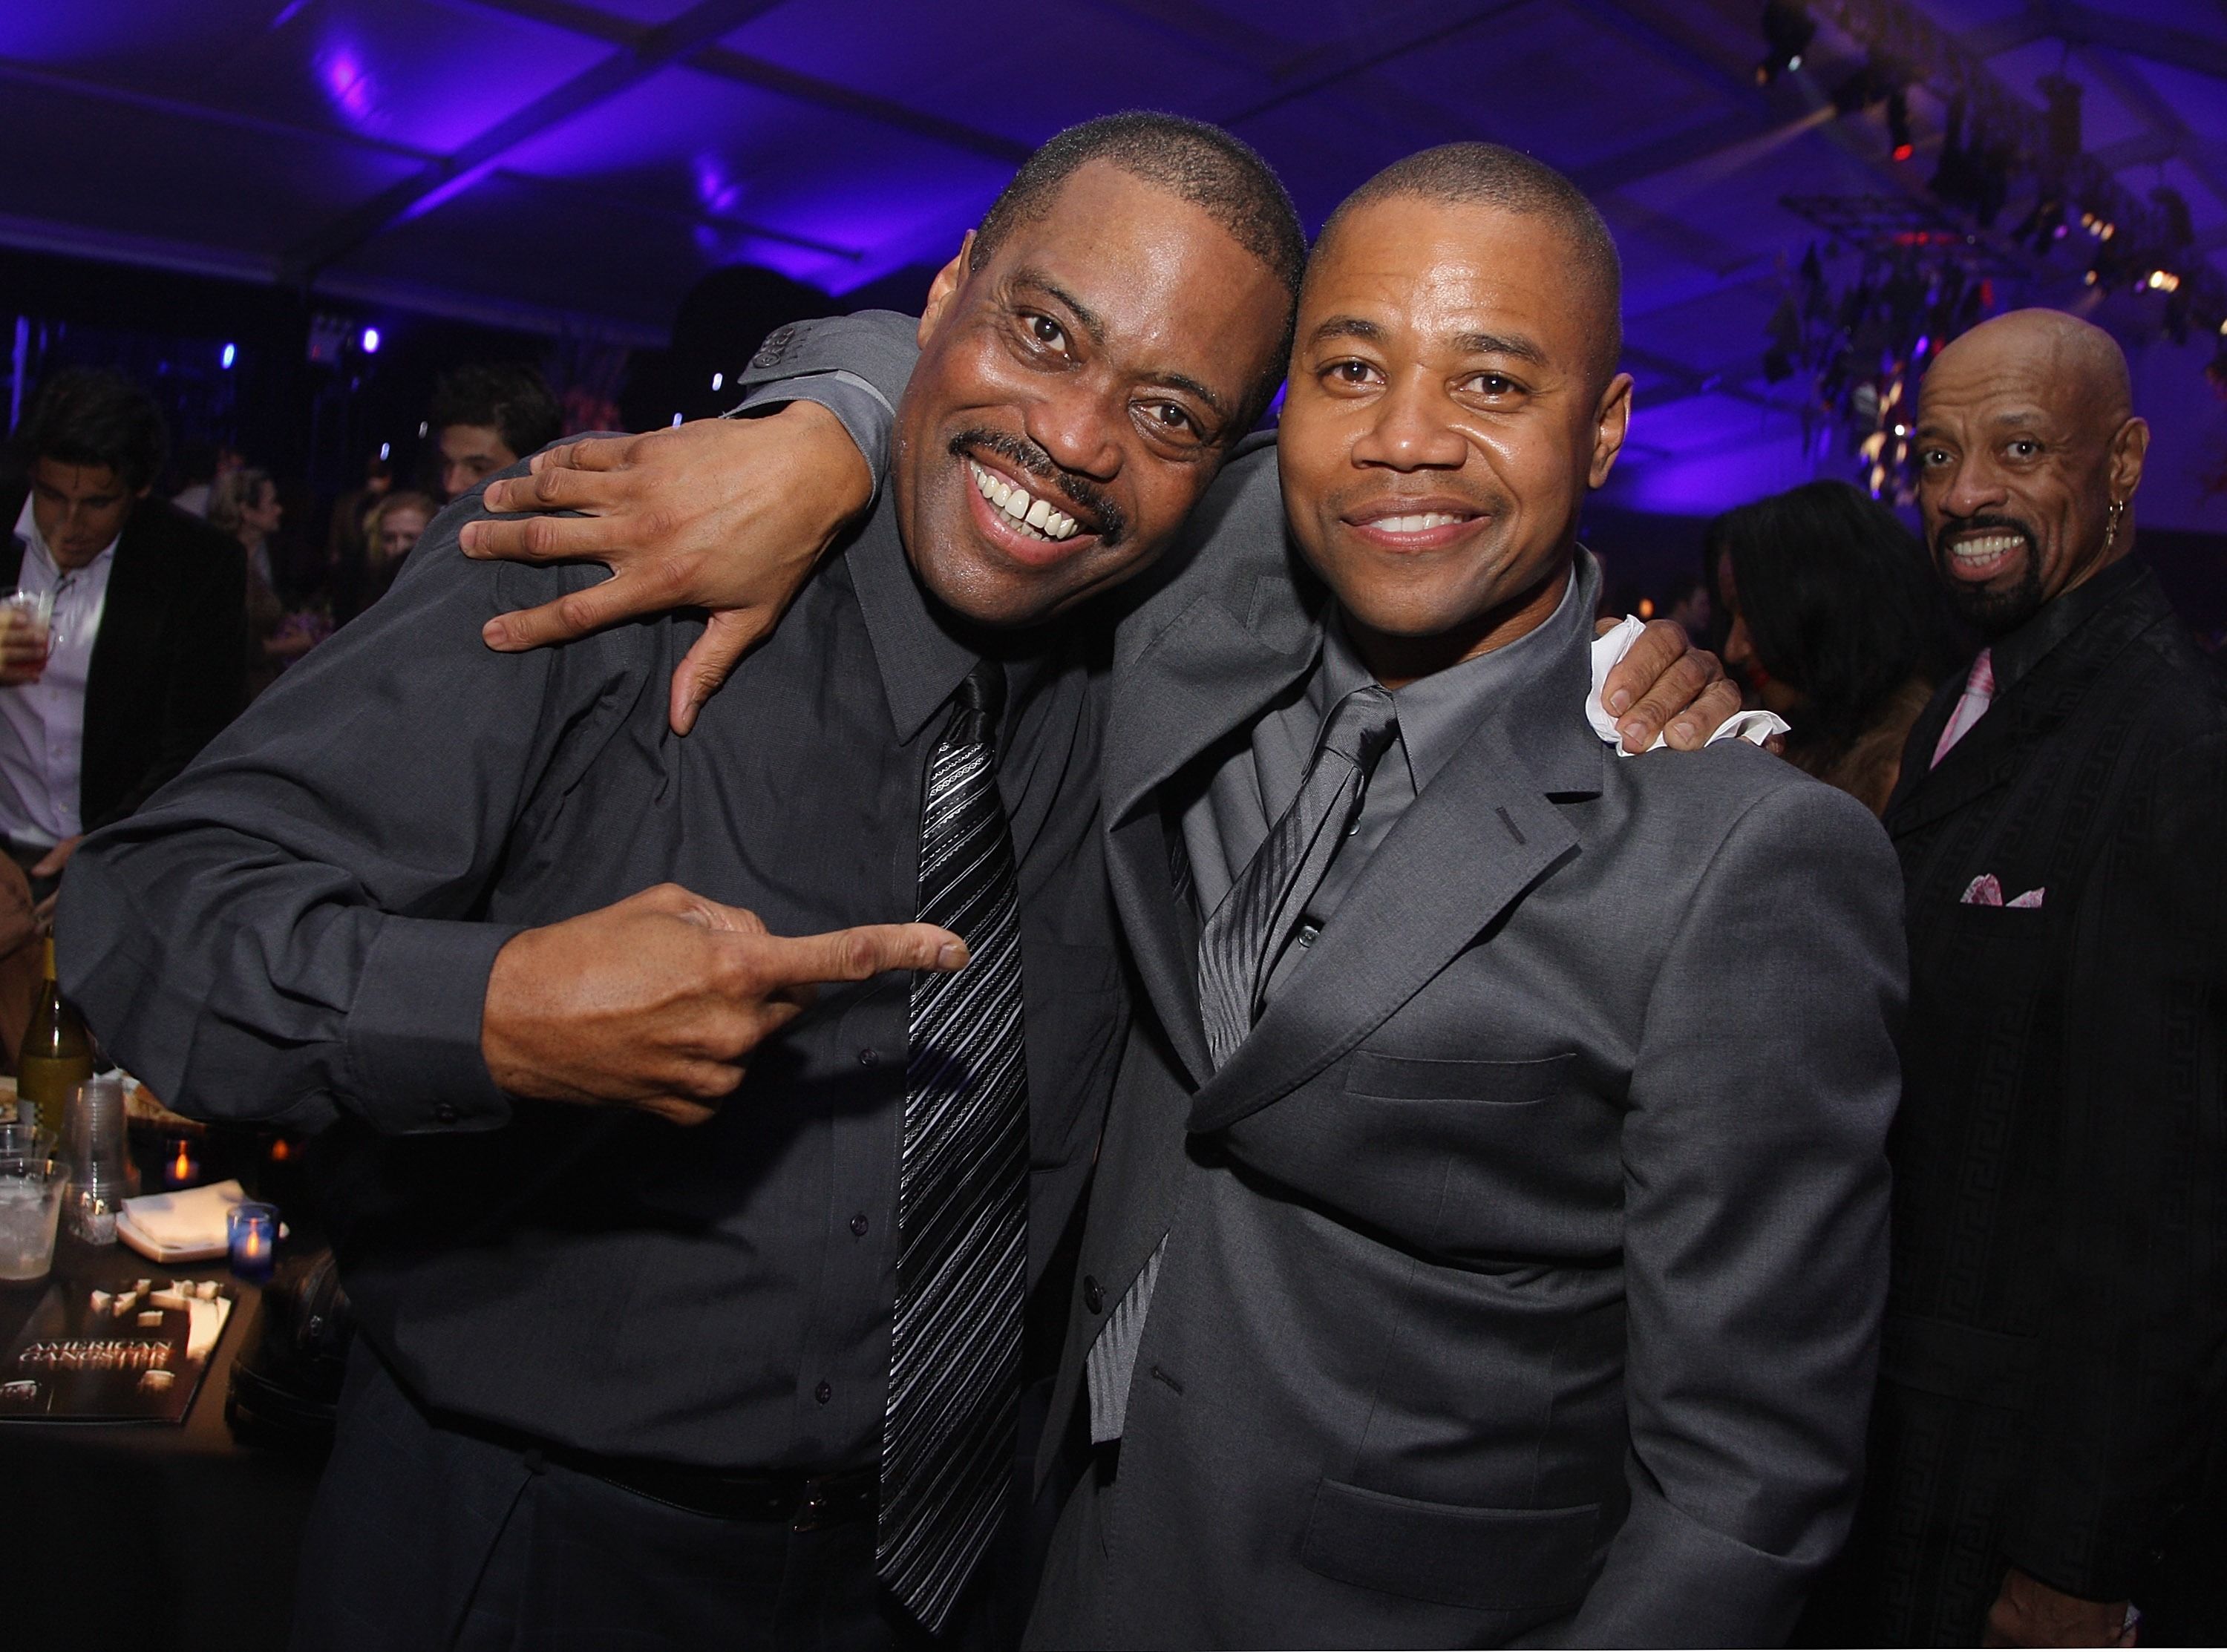 Cuba Gooding Sr. and Cuba Gooding Jr. during the after-party of the world premiere of "American Gangster" at the Apollo Theater on October 19, 2007 in New York City. | Source: Getty Images